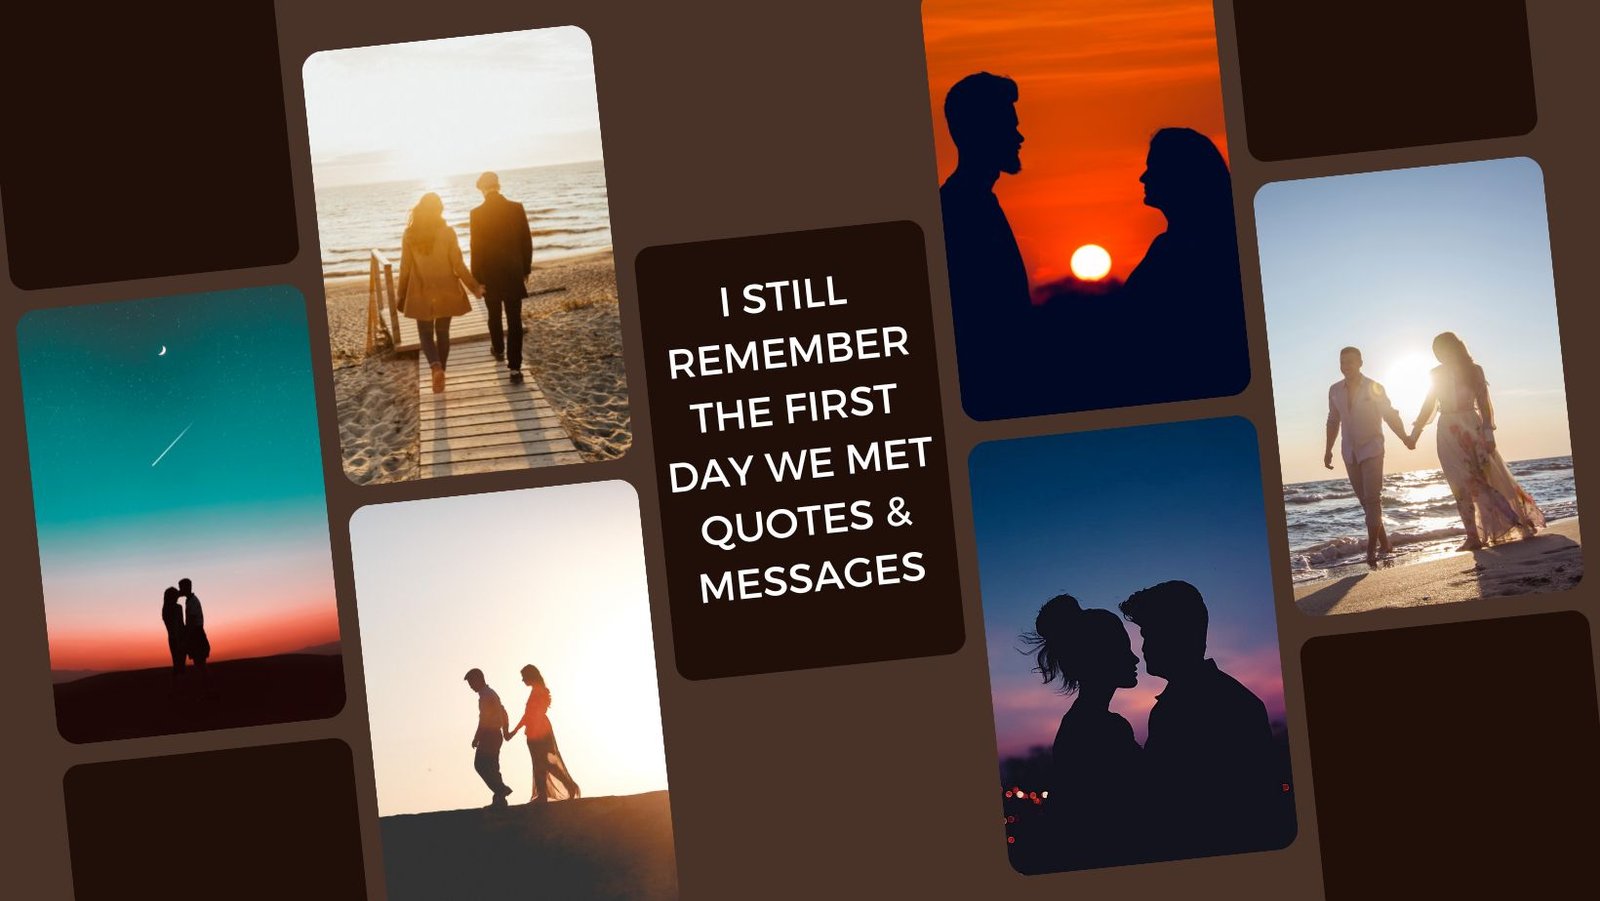 I Still Remember the First Day We Met Quotes & Messages